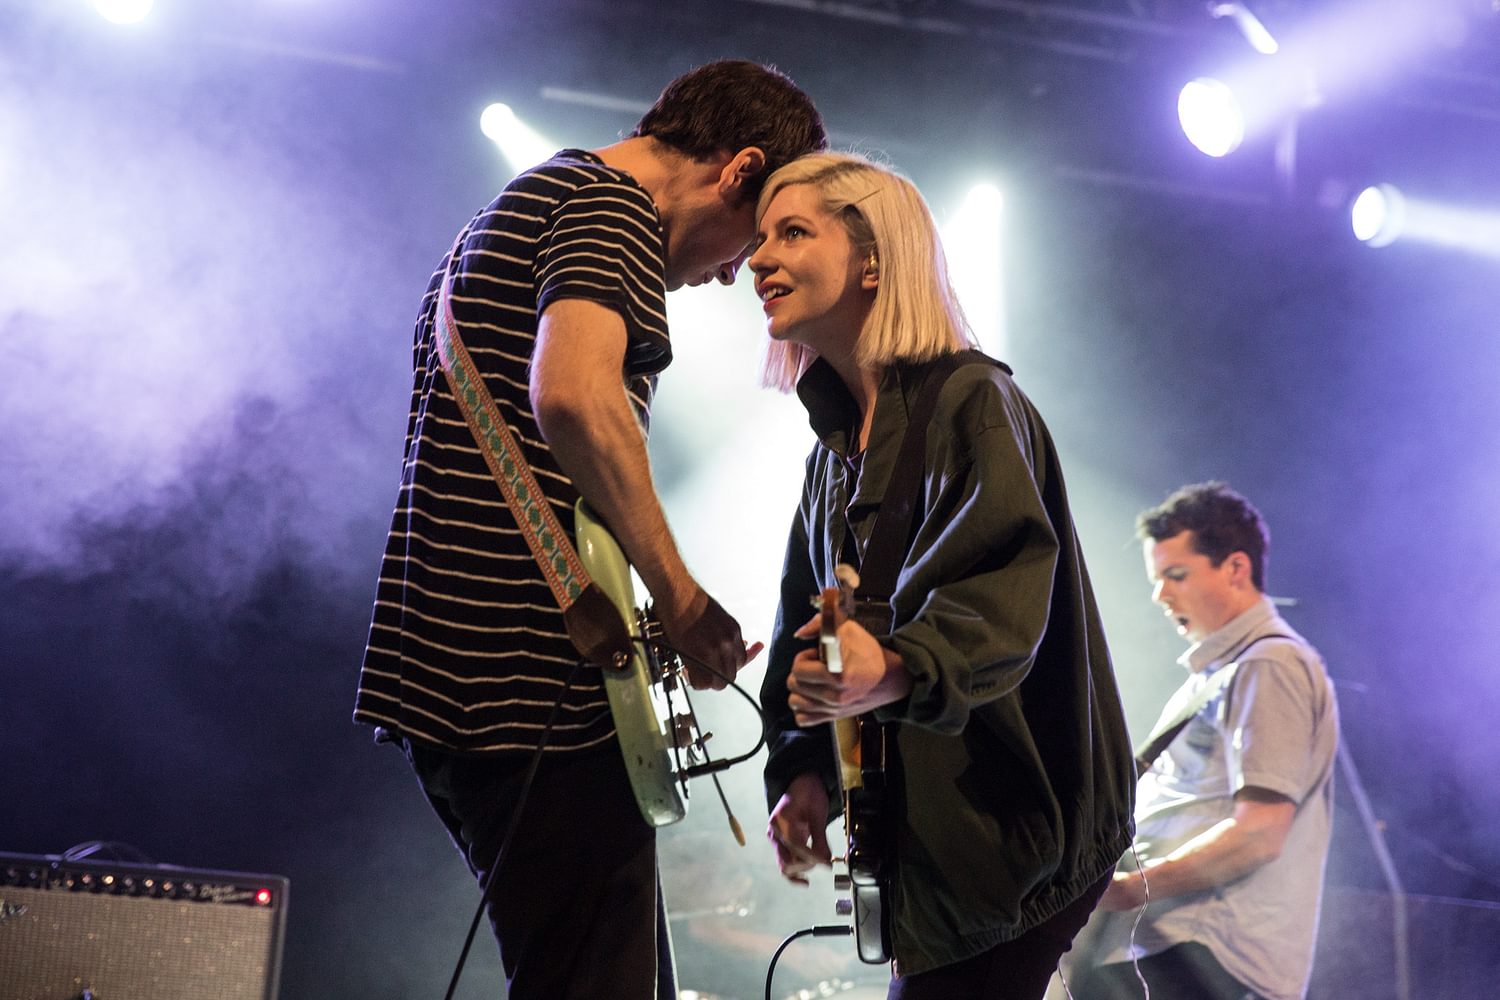 Alvvays bring new airings and ballroom dancing to Reading 2015